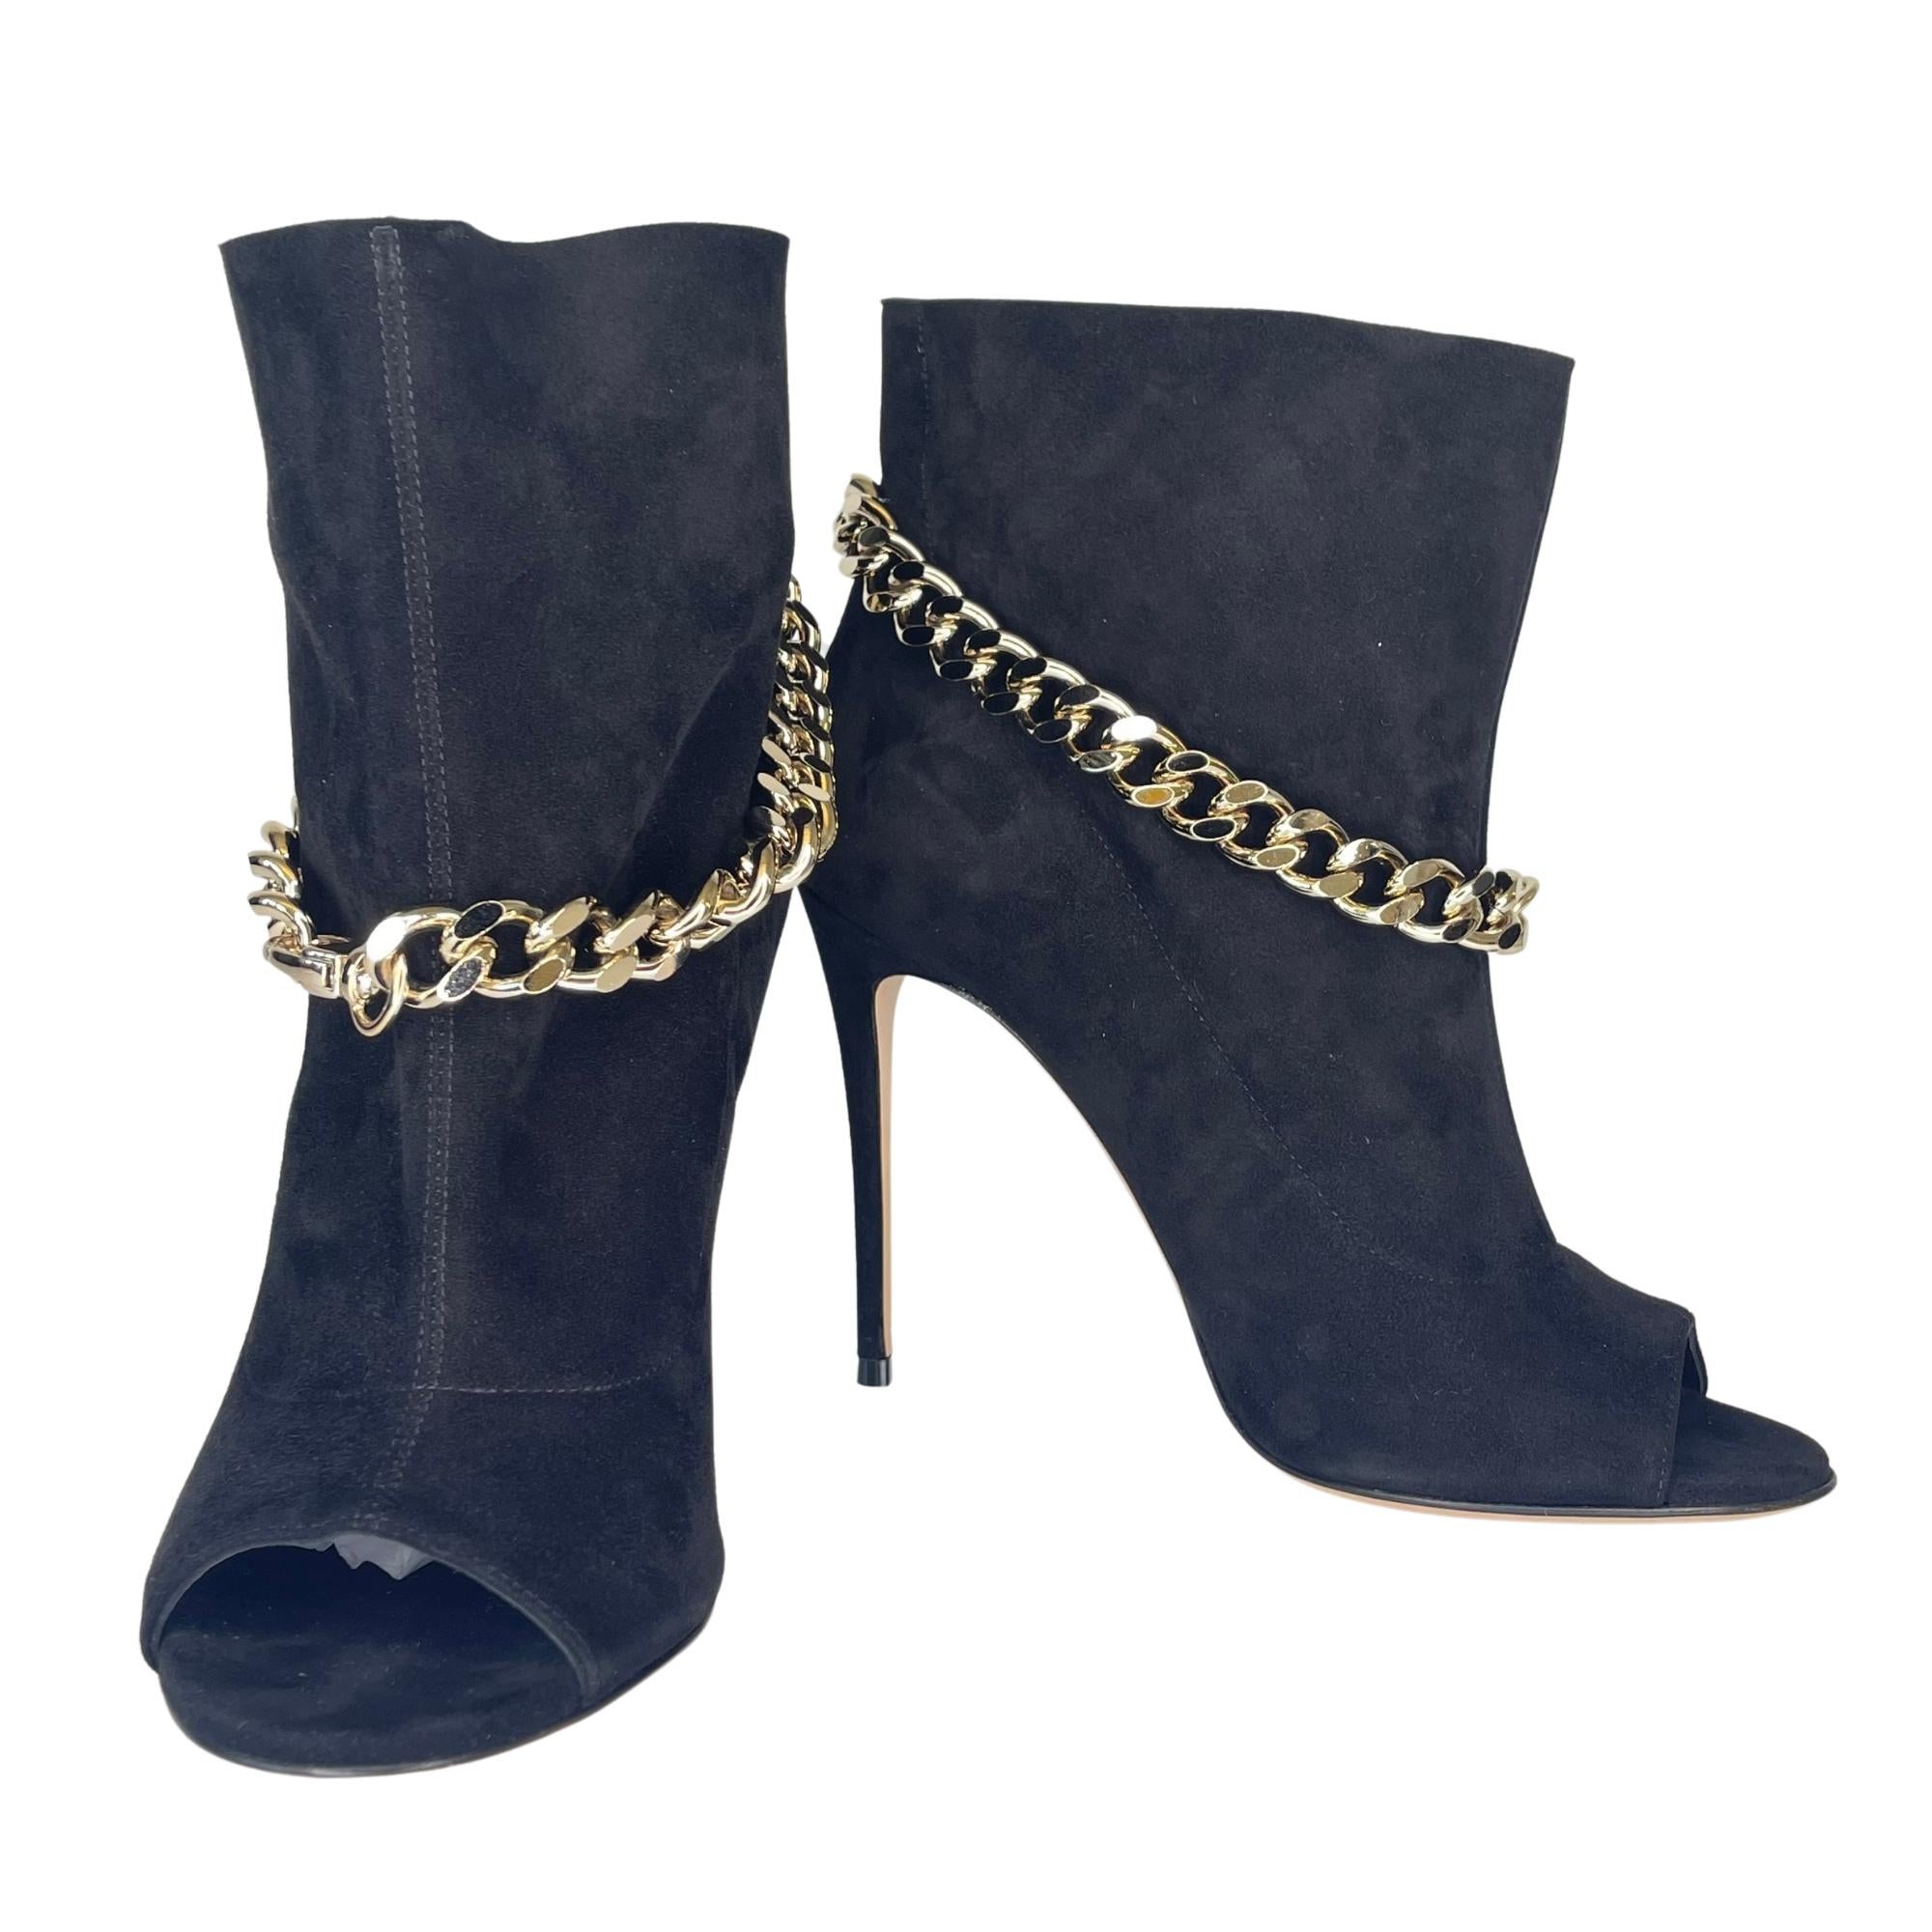 Casadei Chain Open Toe Stiletto Ankle Boot Black (38 EU) In New Condition For Sale In Montreal, Quebec